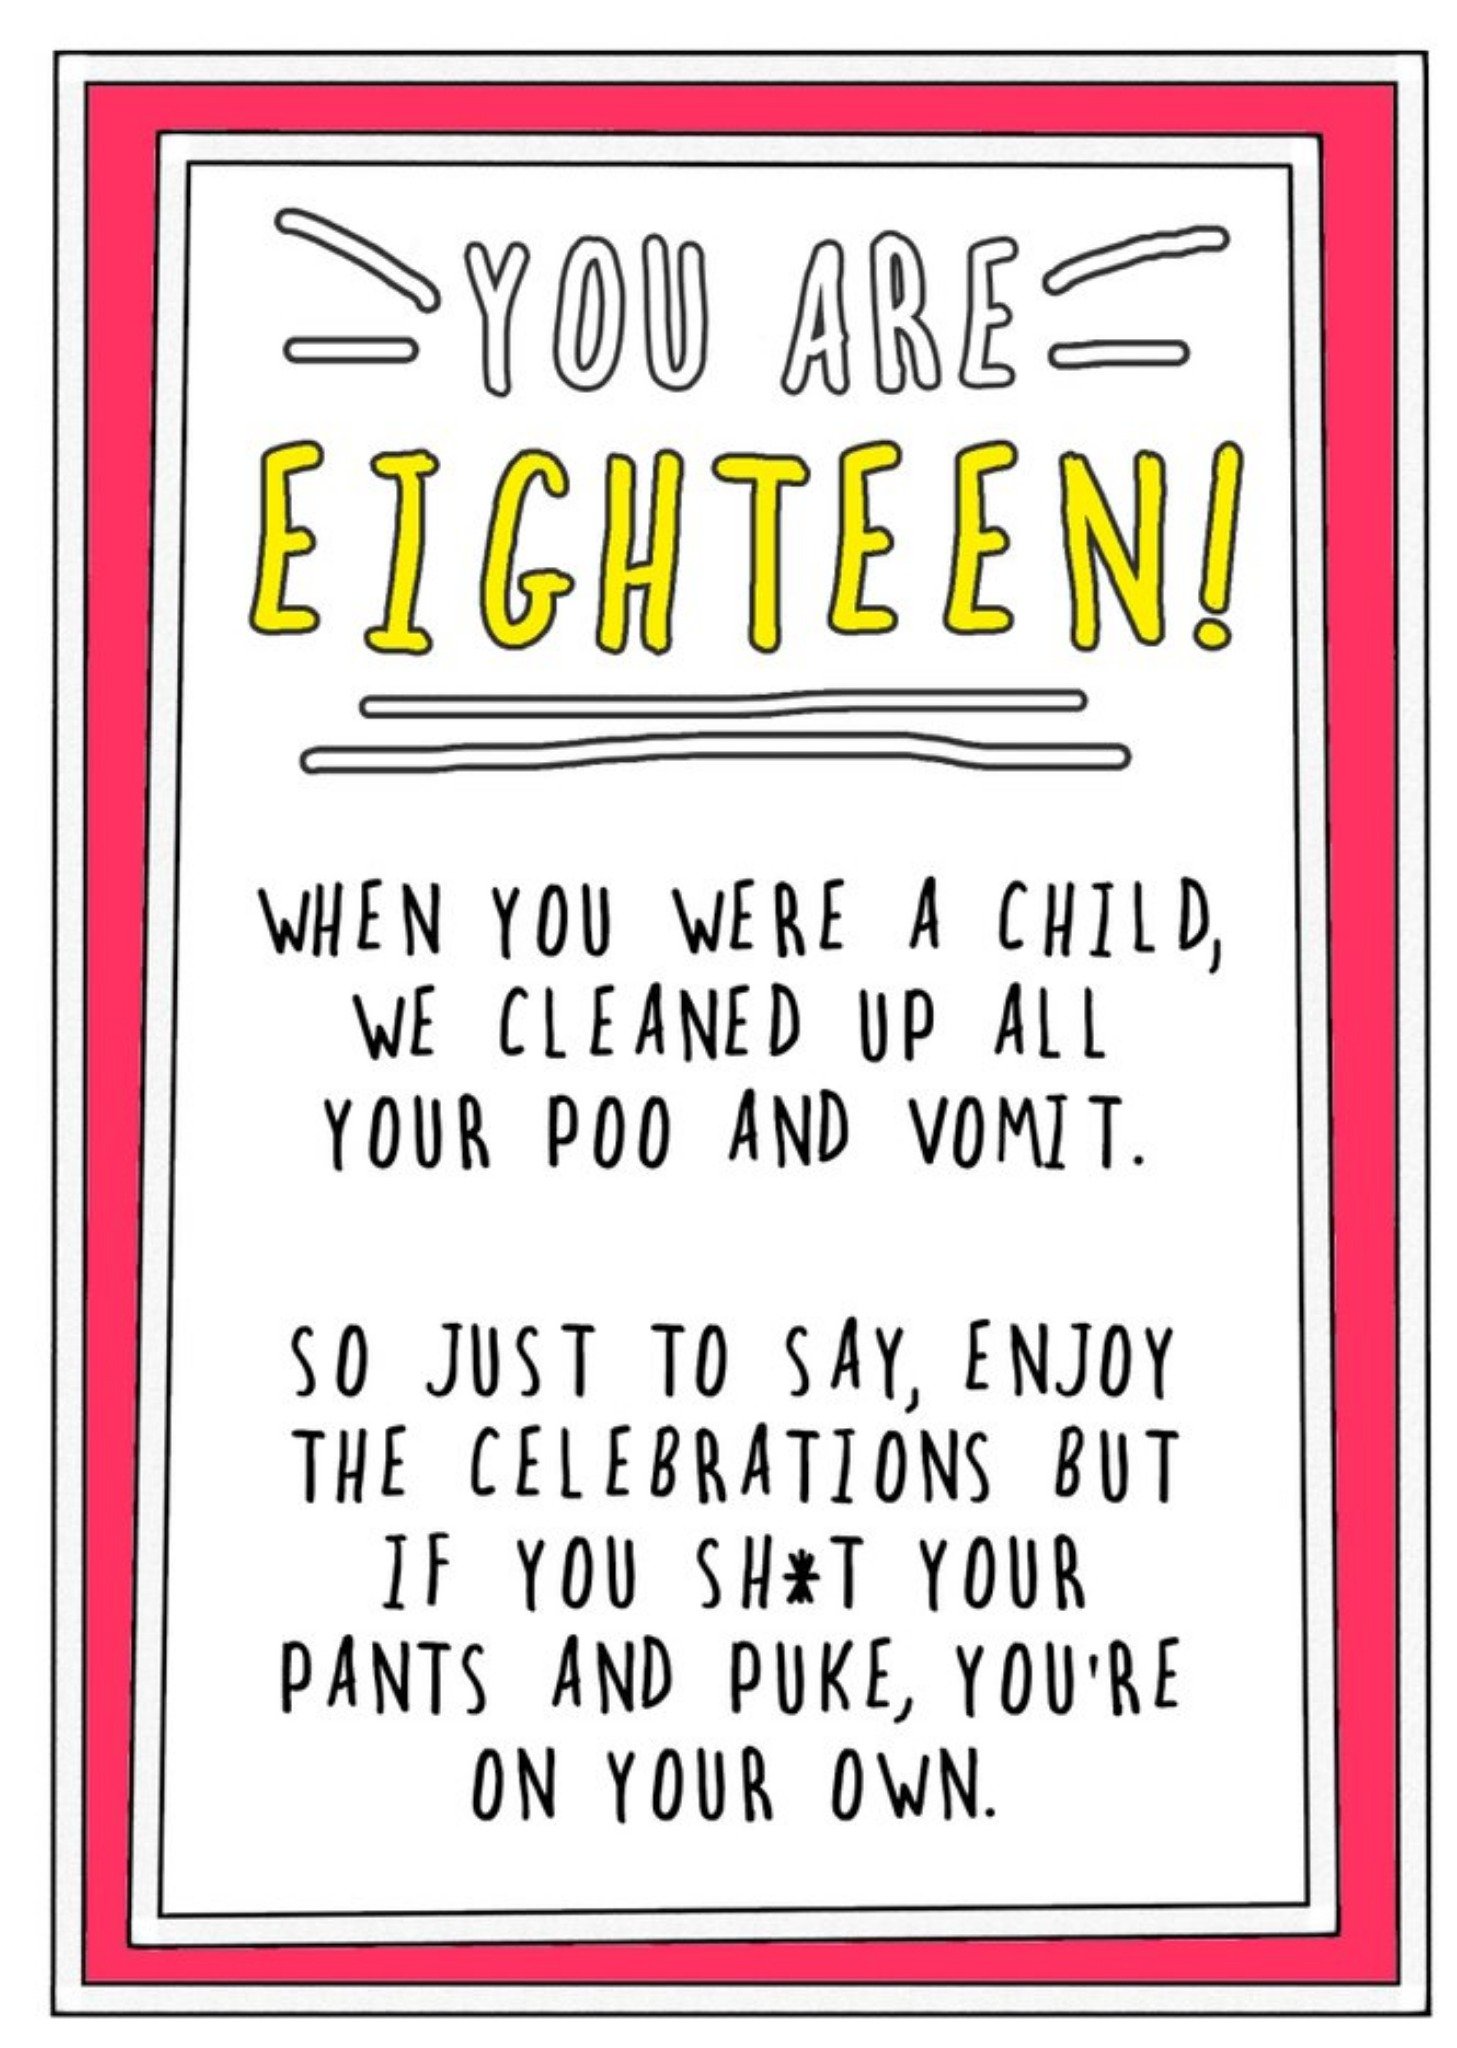 Go La La Funny We Cleaned Up Your Poo And Vomit 18th Birthday Card, Large